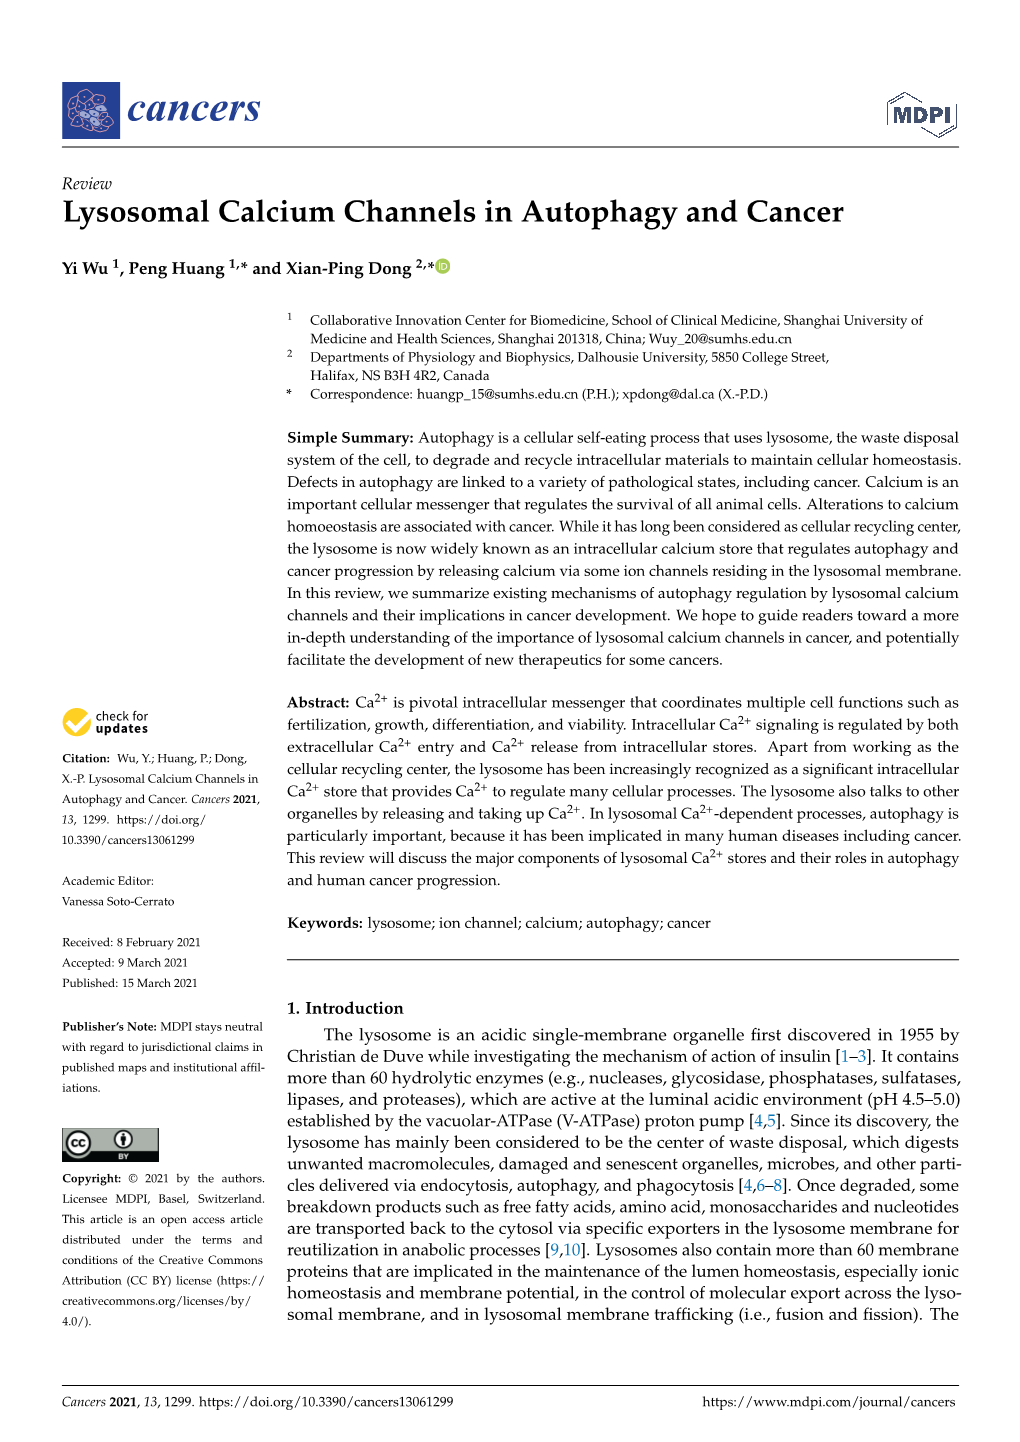 Lysosomal Calcium Channels in Autophagy and Cancer